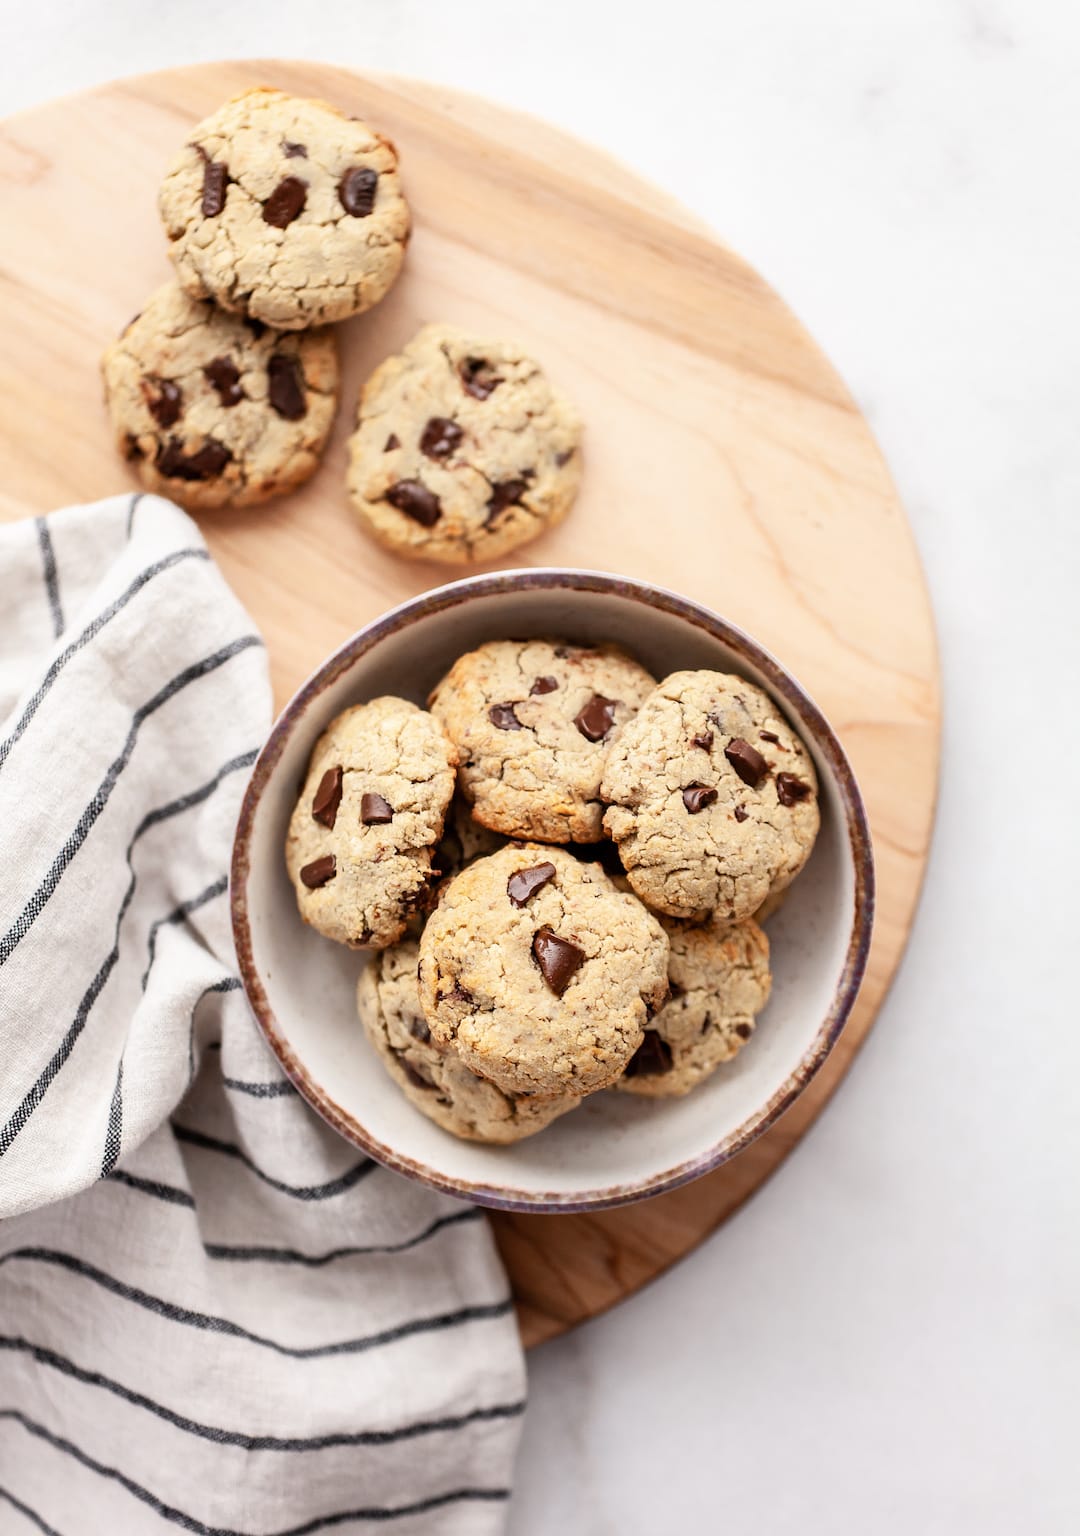 Soft & Chewy Coconut Flour Chocolate Chip Cookies In a Bowl on a Wood Platter